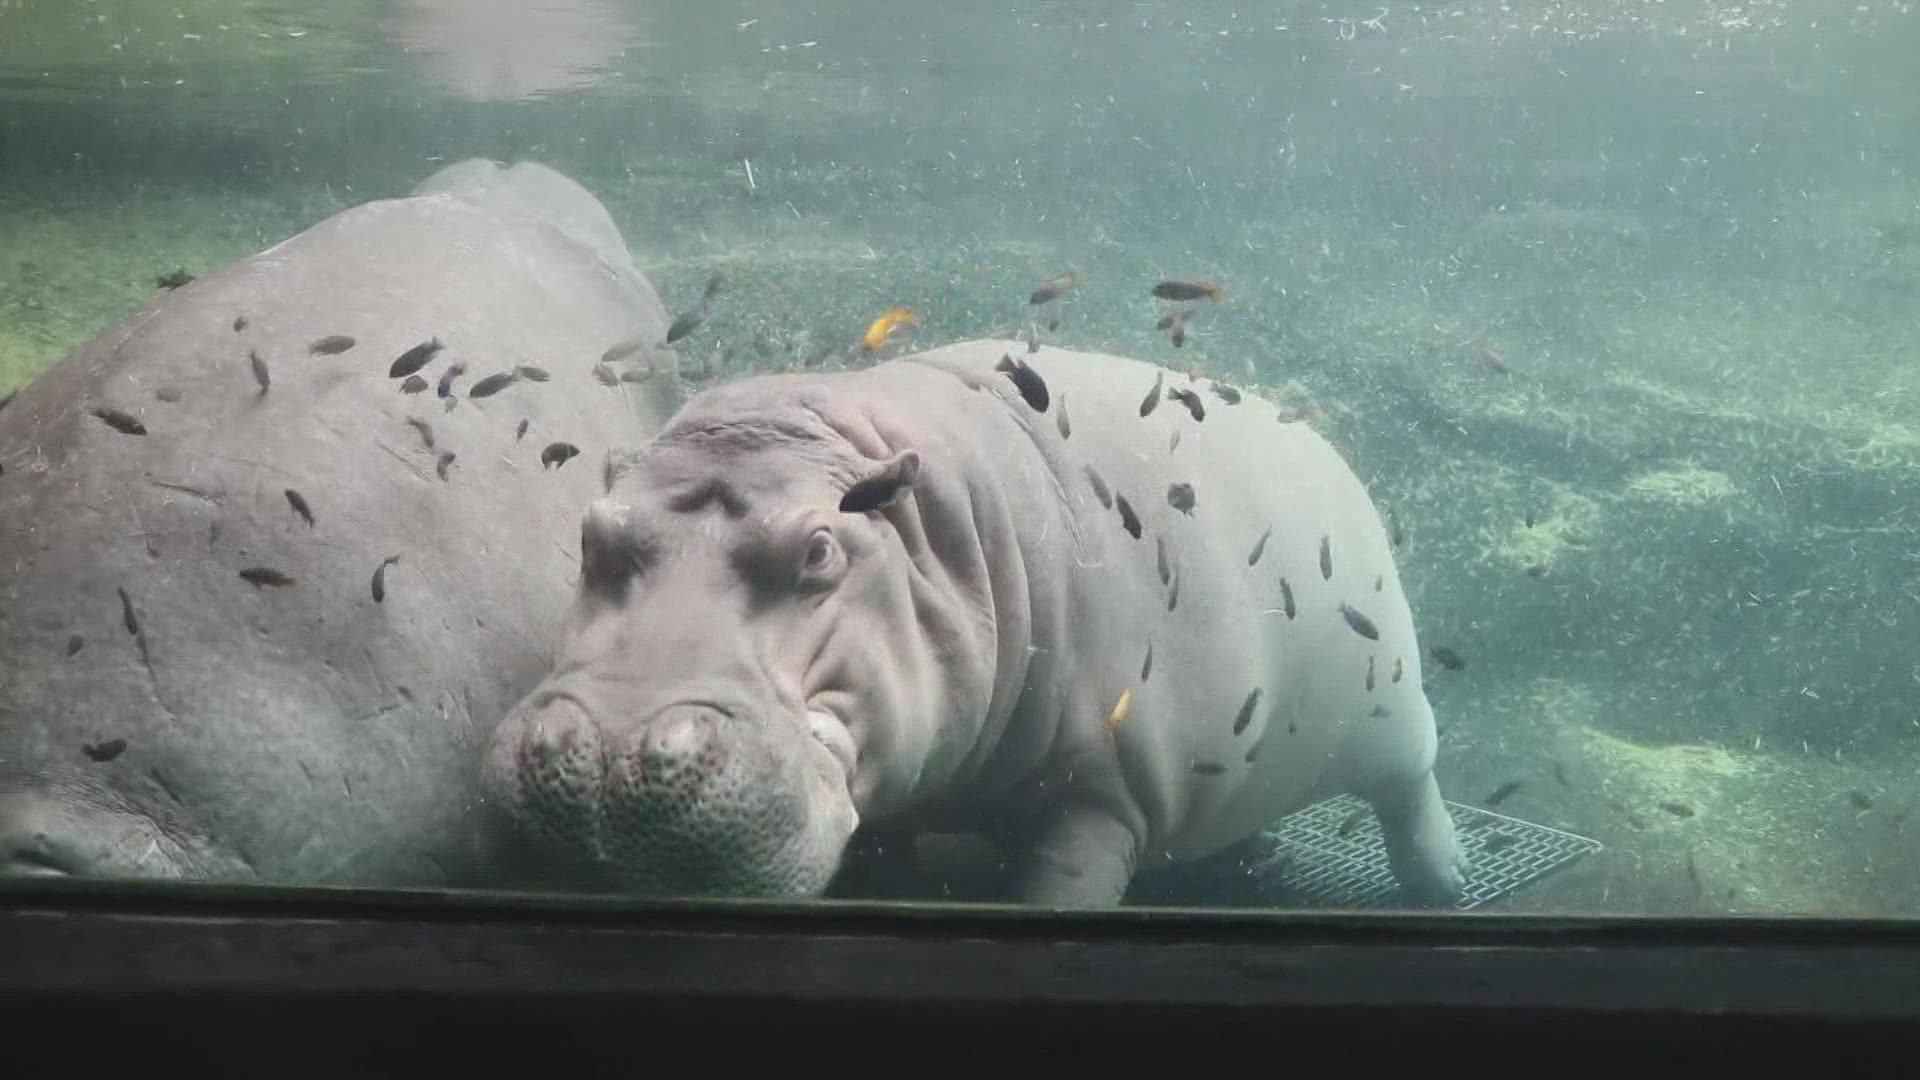 The San Antonio Zoo hopes that forming a connection with the animals will inspire guests to promote conservation.